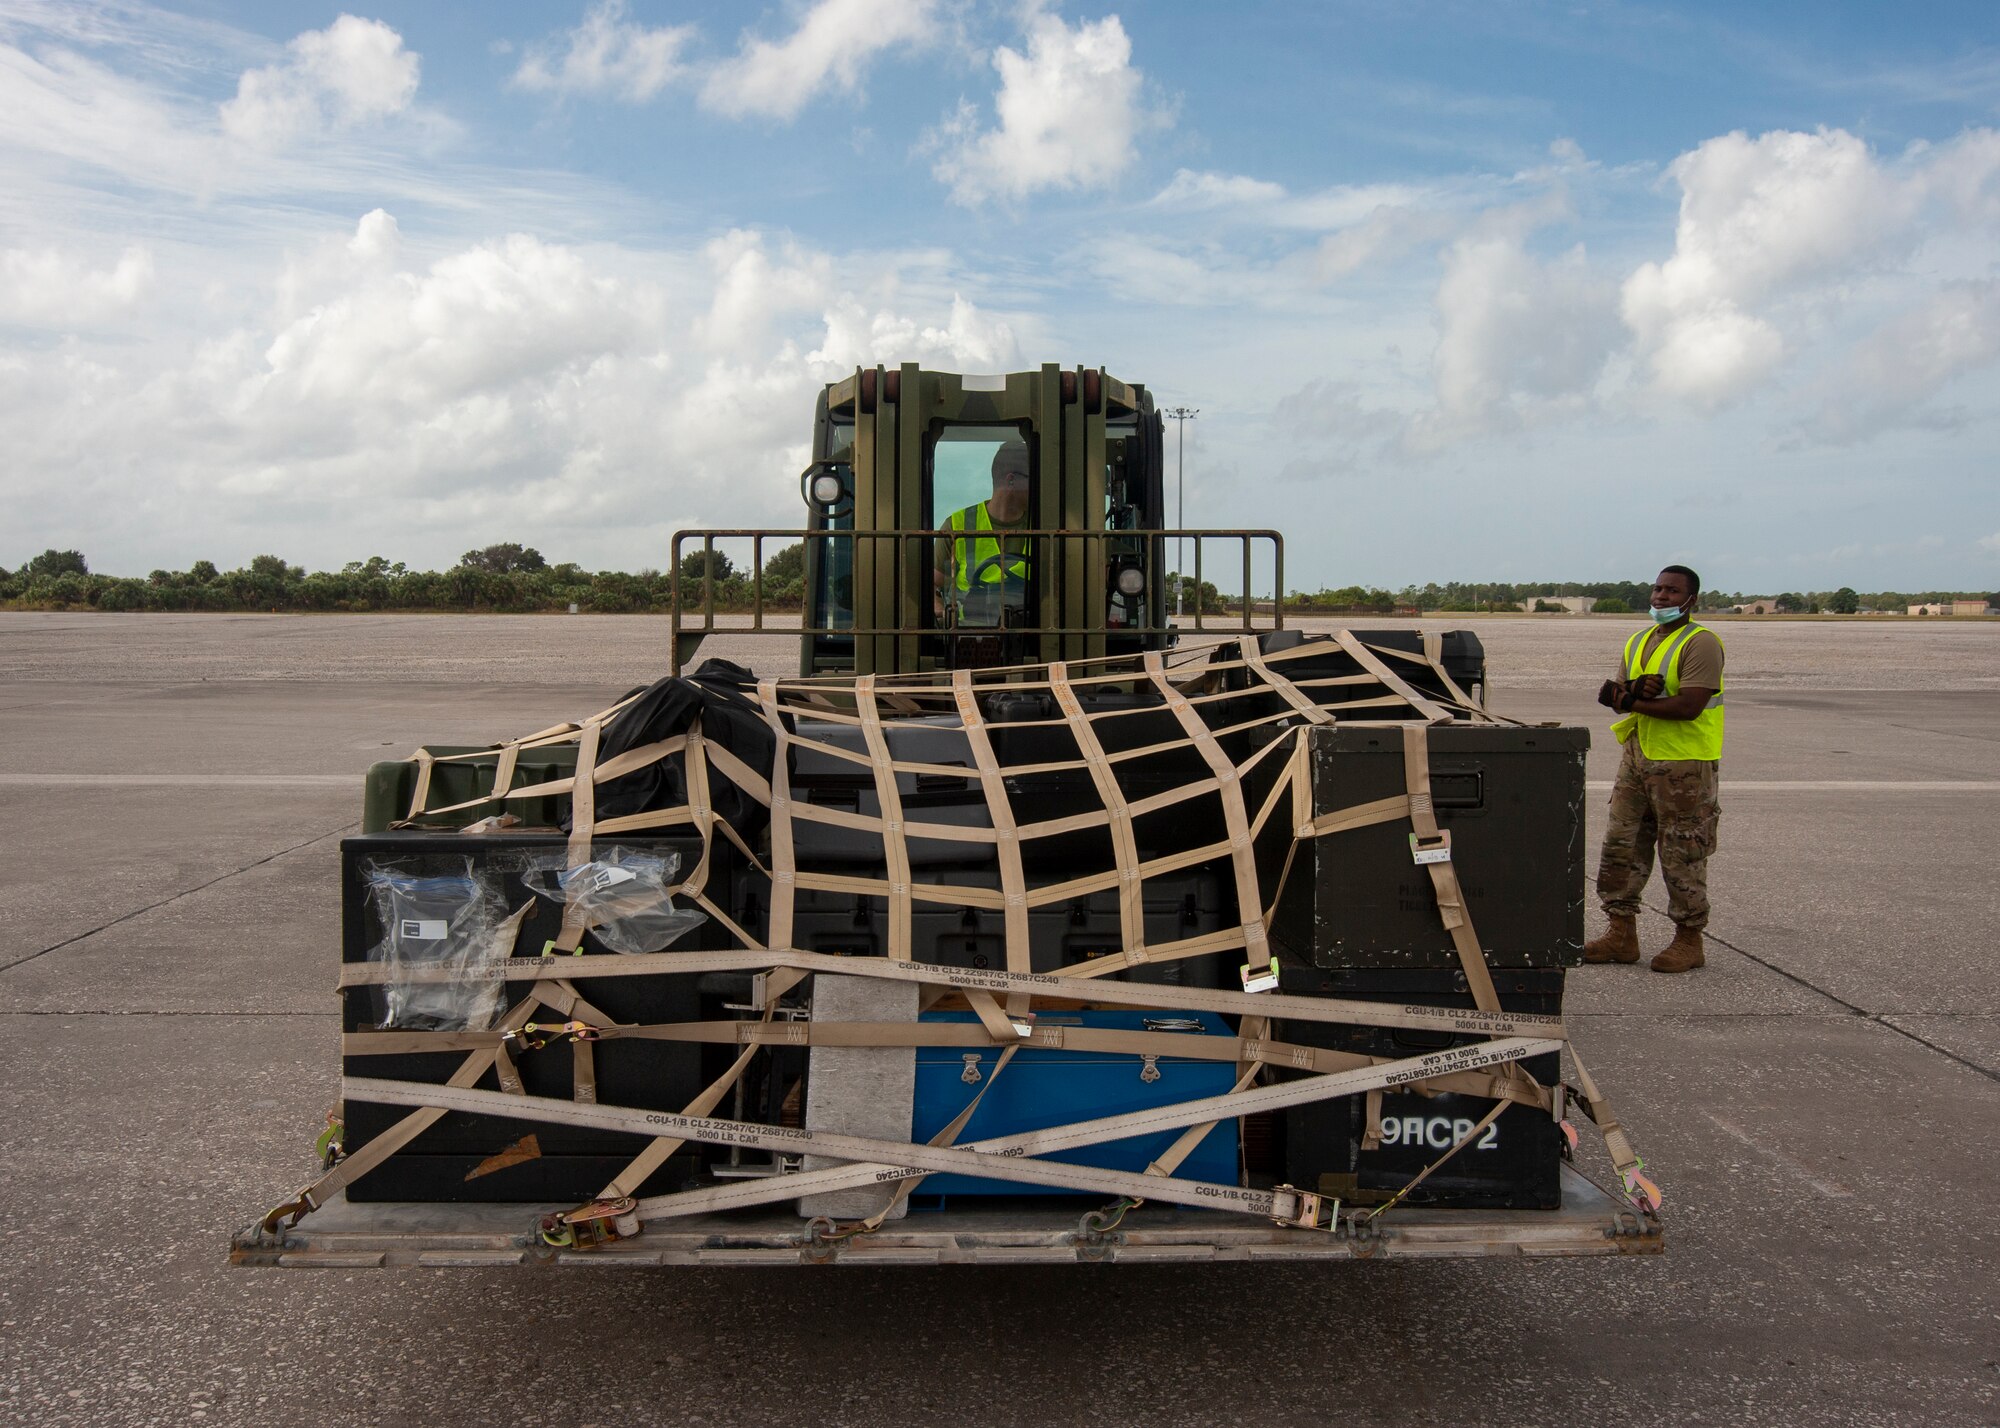 Airmen from the 6th Logistics Readiness Squadron at MacDill Air Force Base, Fla., use a 10K Standard Forklift, Oct. 21, 2020, to set a pallet on the flightline. The pallet contained deployment gear for an exercise to test the global mobility of the crew. (U.S. Air Force Photo by A1C David D. McLoney)